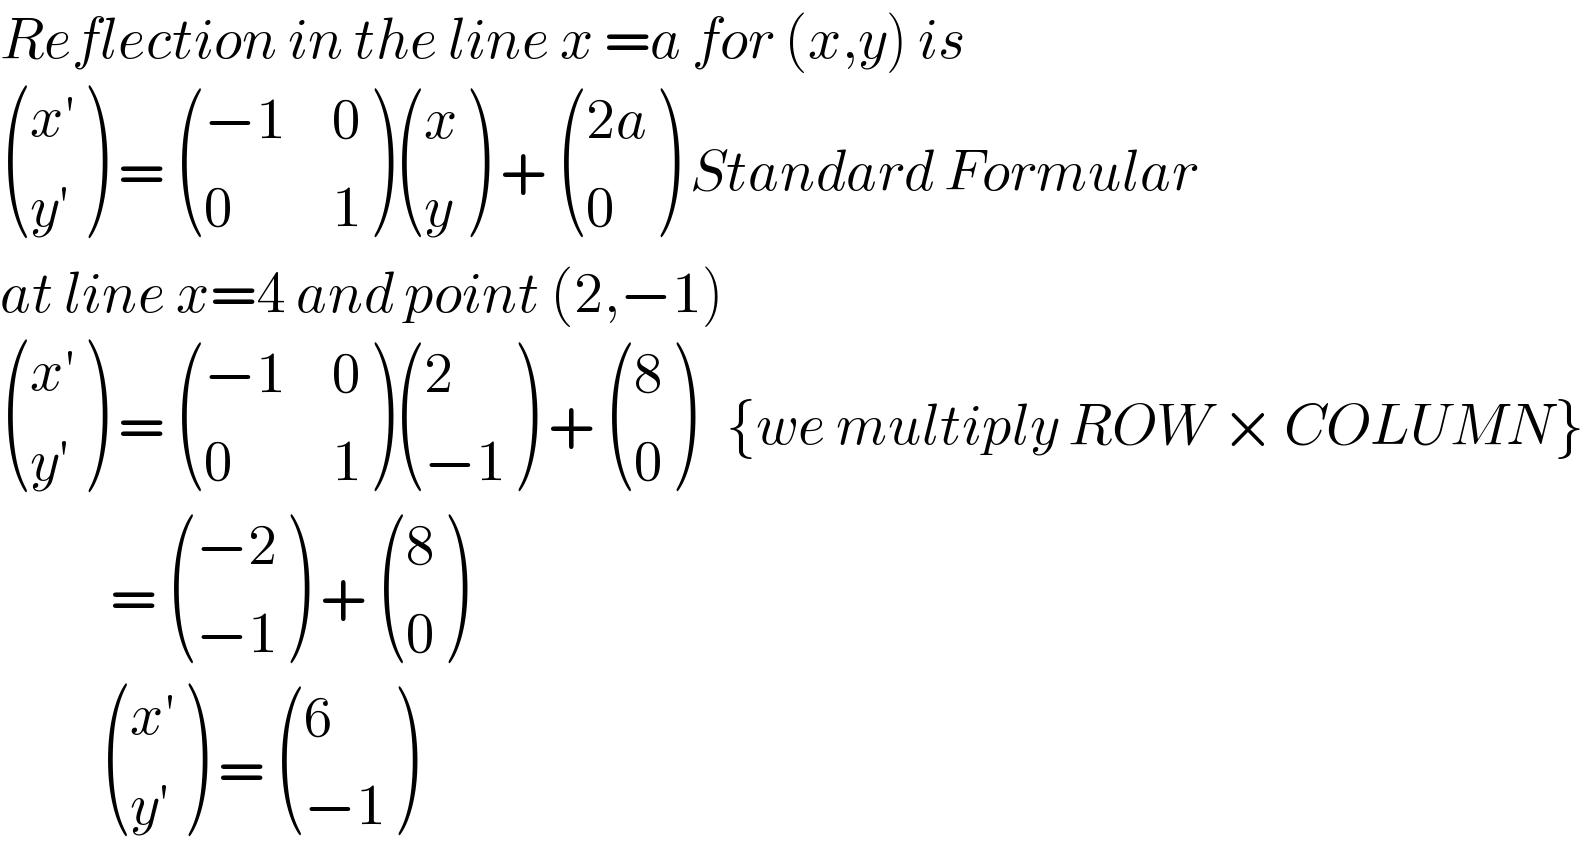 Reflection in the line x =a for (x,y) is   (((x′)),((y′)) ) =  (((−1),0),(0,1) ) ((x),(y) ) +  (((2a)),(0) ) Standard Formular  at line x=4 and point (2,−1)   (((x′)),((y′)) ) =  (((−1),0),(0,1) ) ((2),((−1)) ) +  ((8),(0) )   {we multiply ROW × COLUMN}             =  (((−2)),((−1)) ) +  ((8),(0) )             (((x′)),((y′)) ) =  ((6),((−1)) )  